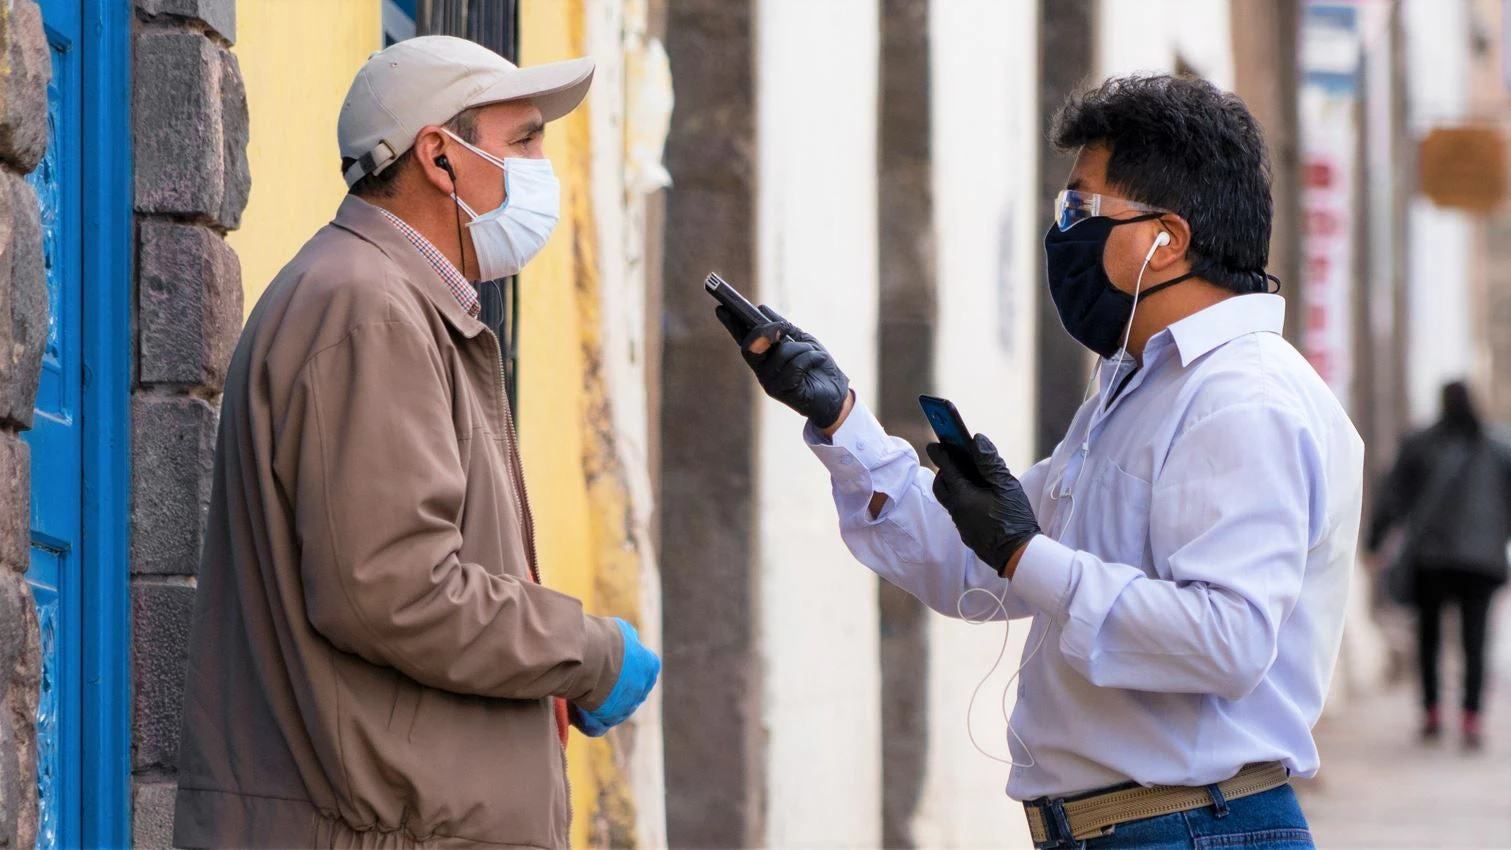 Man conducting an interview about the covid-19 pandemic in Cusco, Peru.